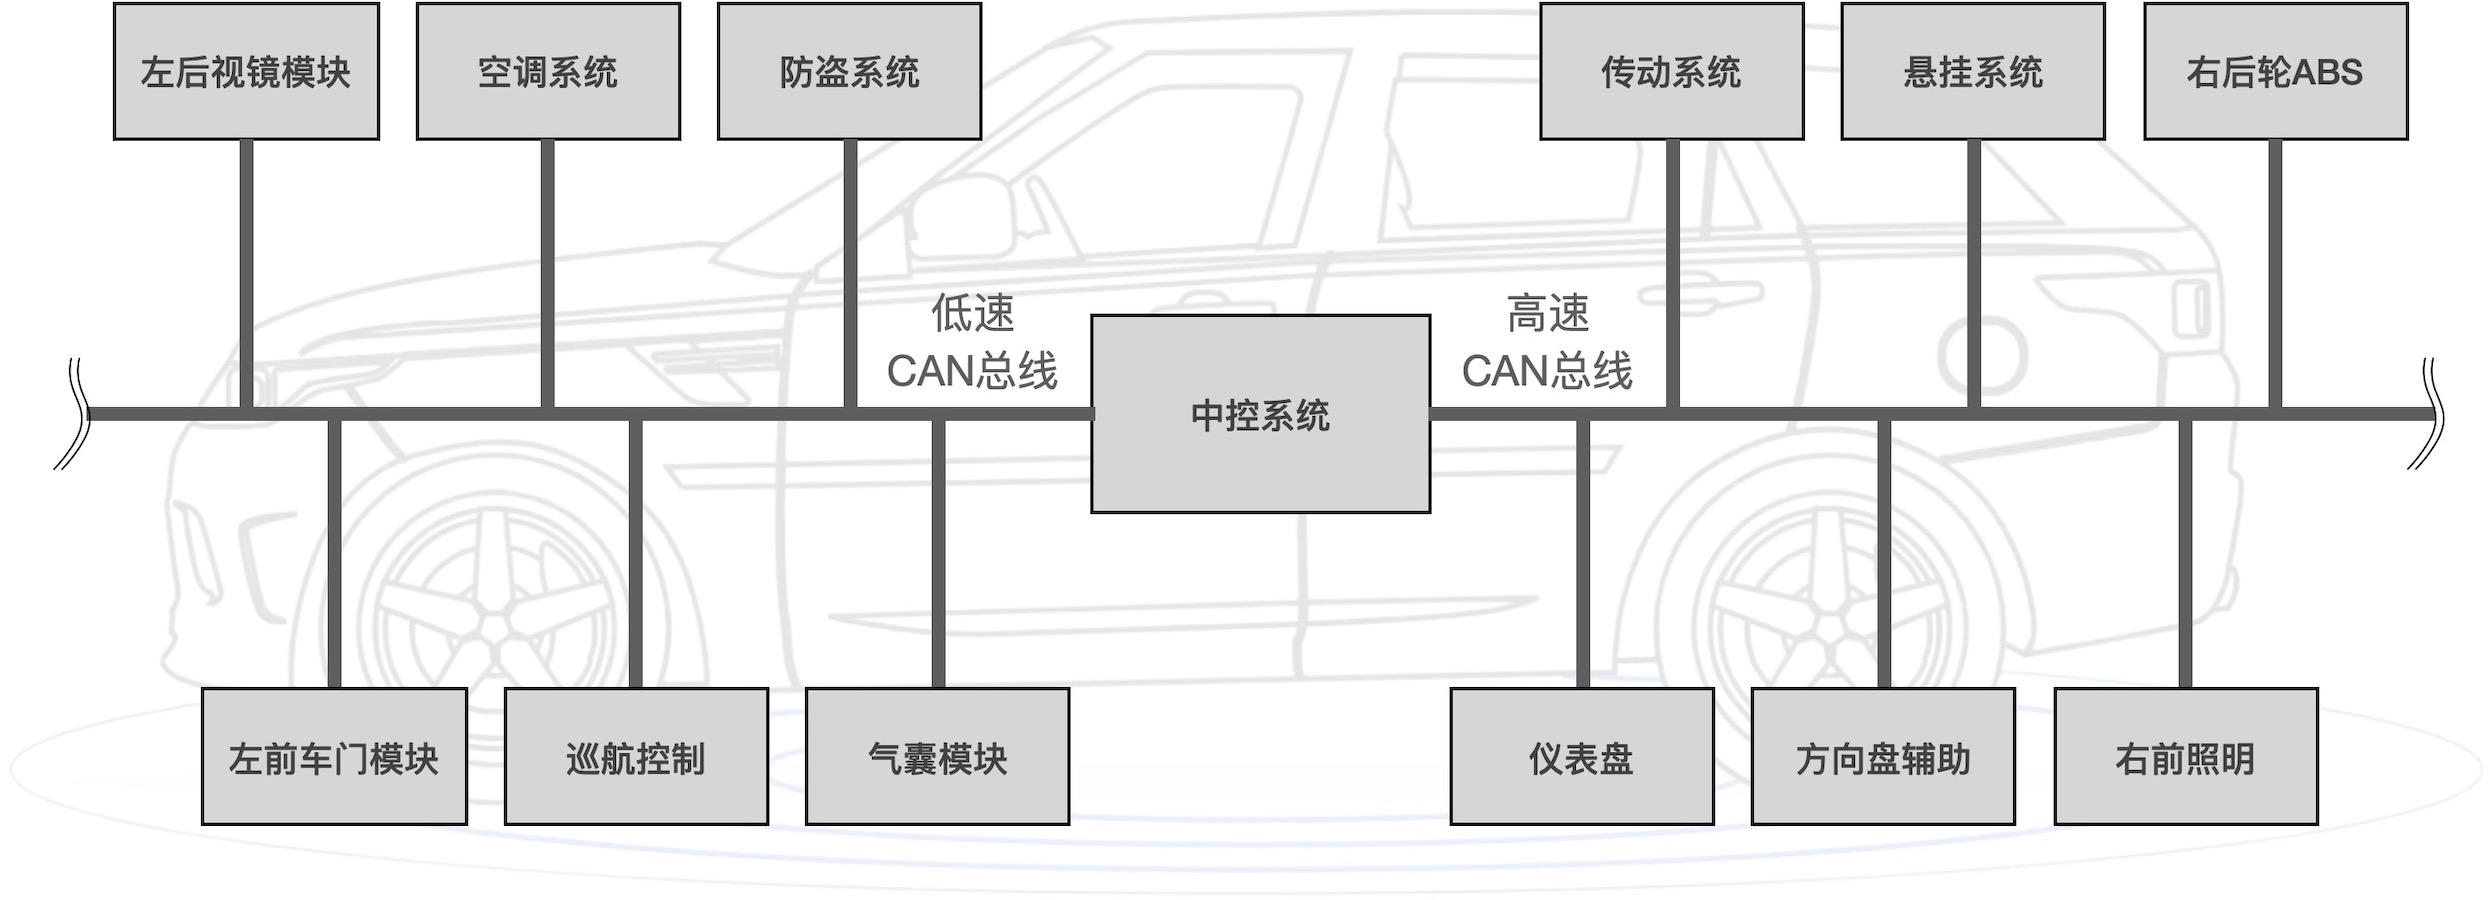 ../_images/canbus_in_automotive_netwaork.jpg